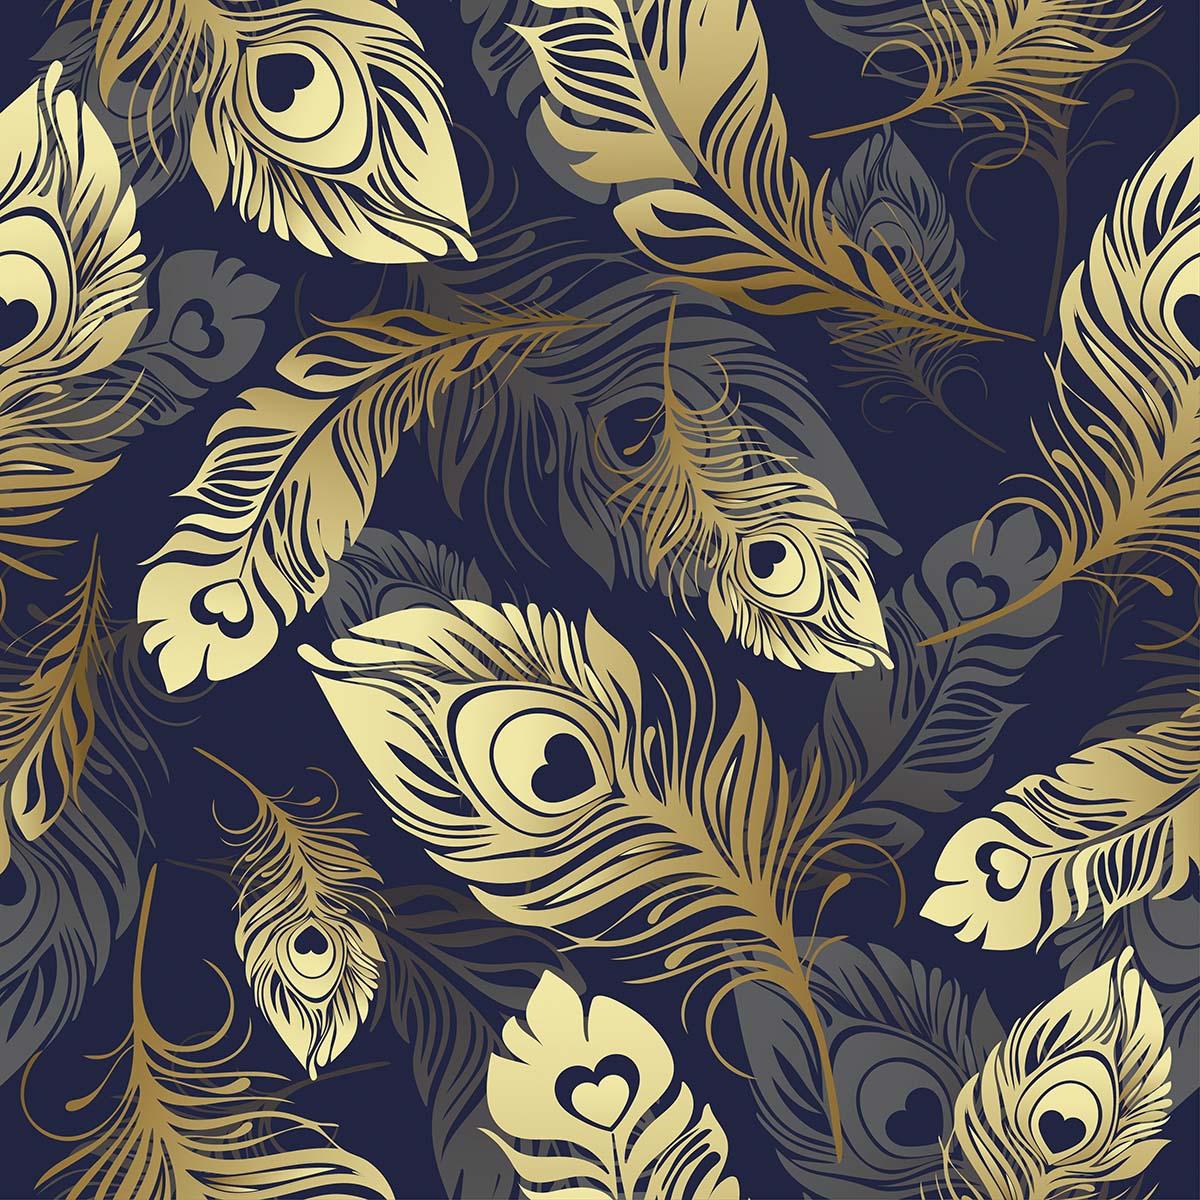 A pattern of gold and black feathers